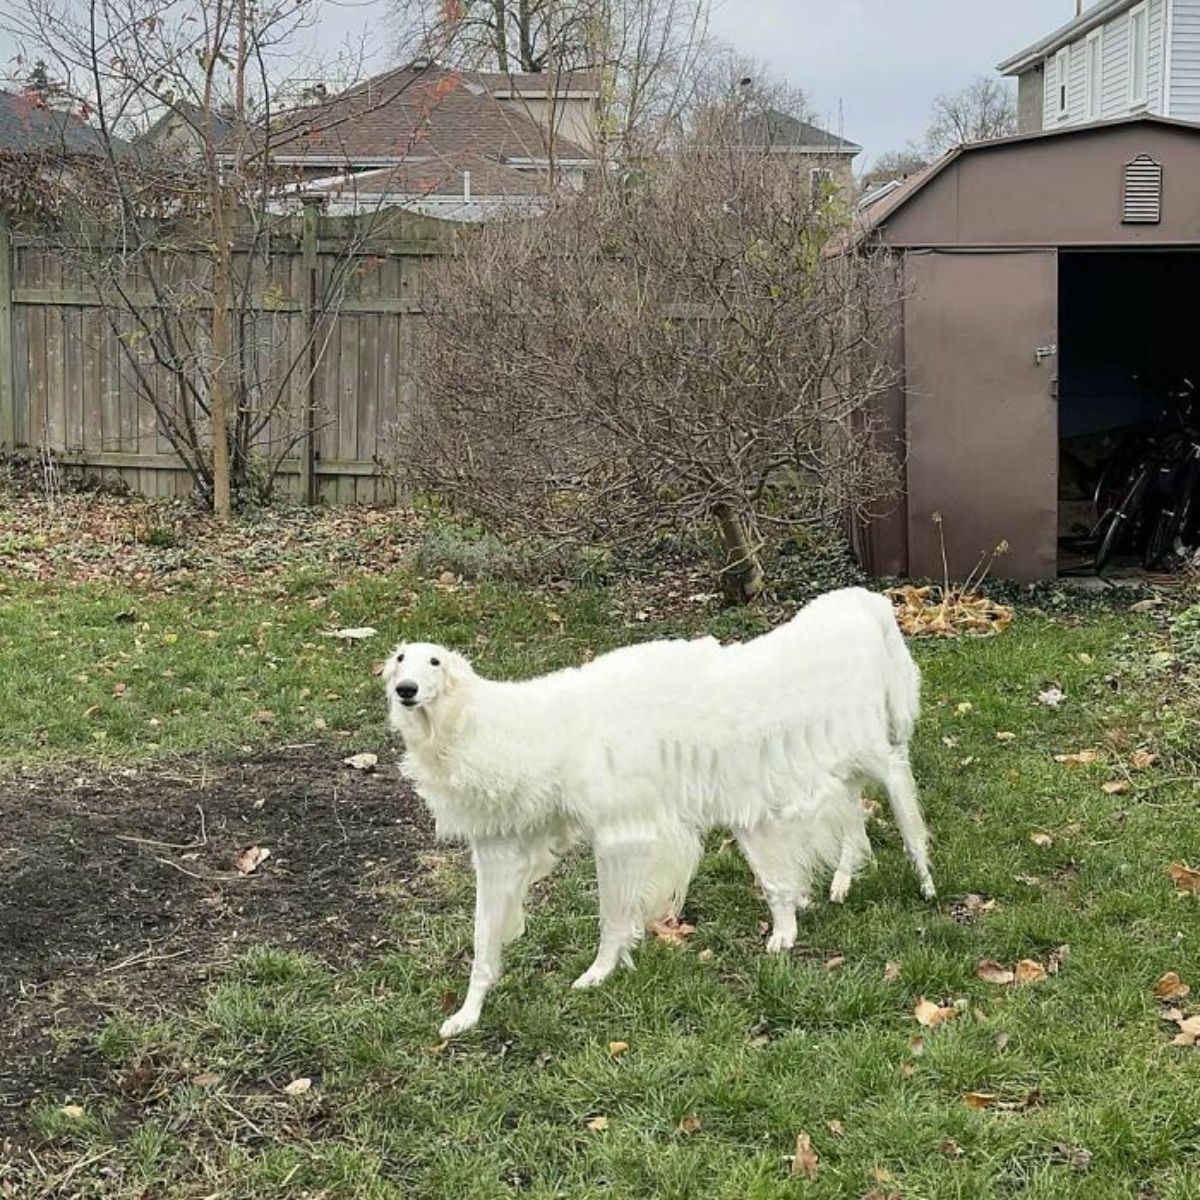 panoramic fail of fluffy white dog with a long body and extra legs